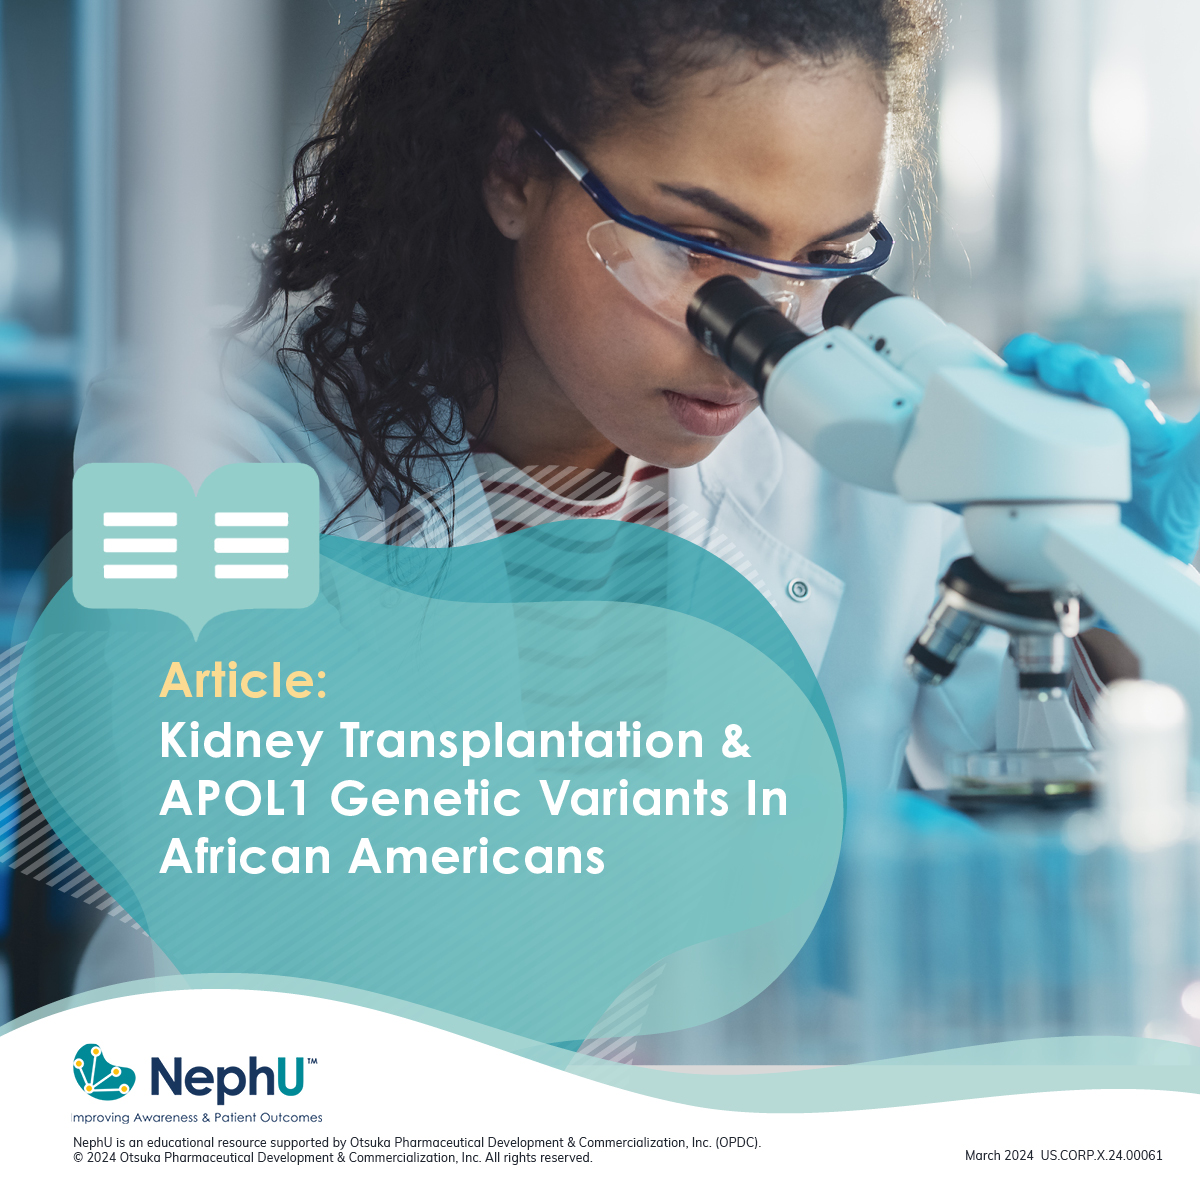 Did you know the genetic variants of the APOL1 gene, called APOL1 G1 & G2, are recognized as risk factors for kidney disease? Learn more in, “Kidney Transplantation & APOL1 Genetic Variants In African Americans.” go.nephu.org/LzYL #KidneyTransplantation #KidneyHealth #NephU